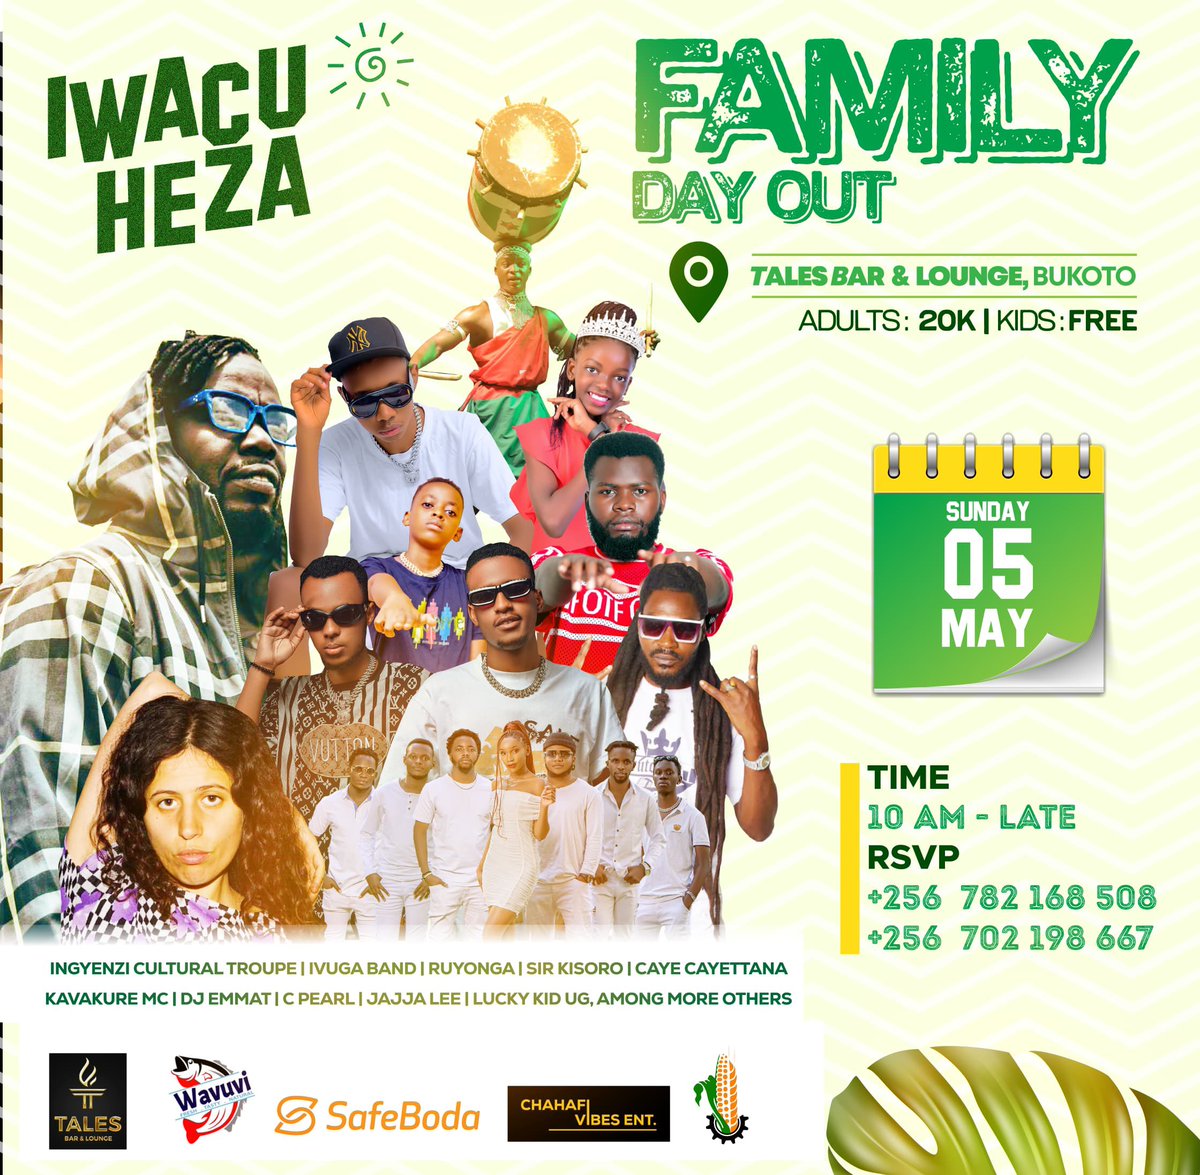 Your #FamilyDayOut entertainers 😊

Let’s not miss out on the fun this Sunday at Tales Lounge Bukoto

#IwacuHeza 
#TweseTuribamwe